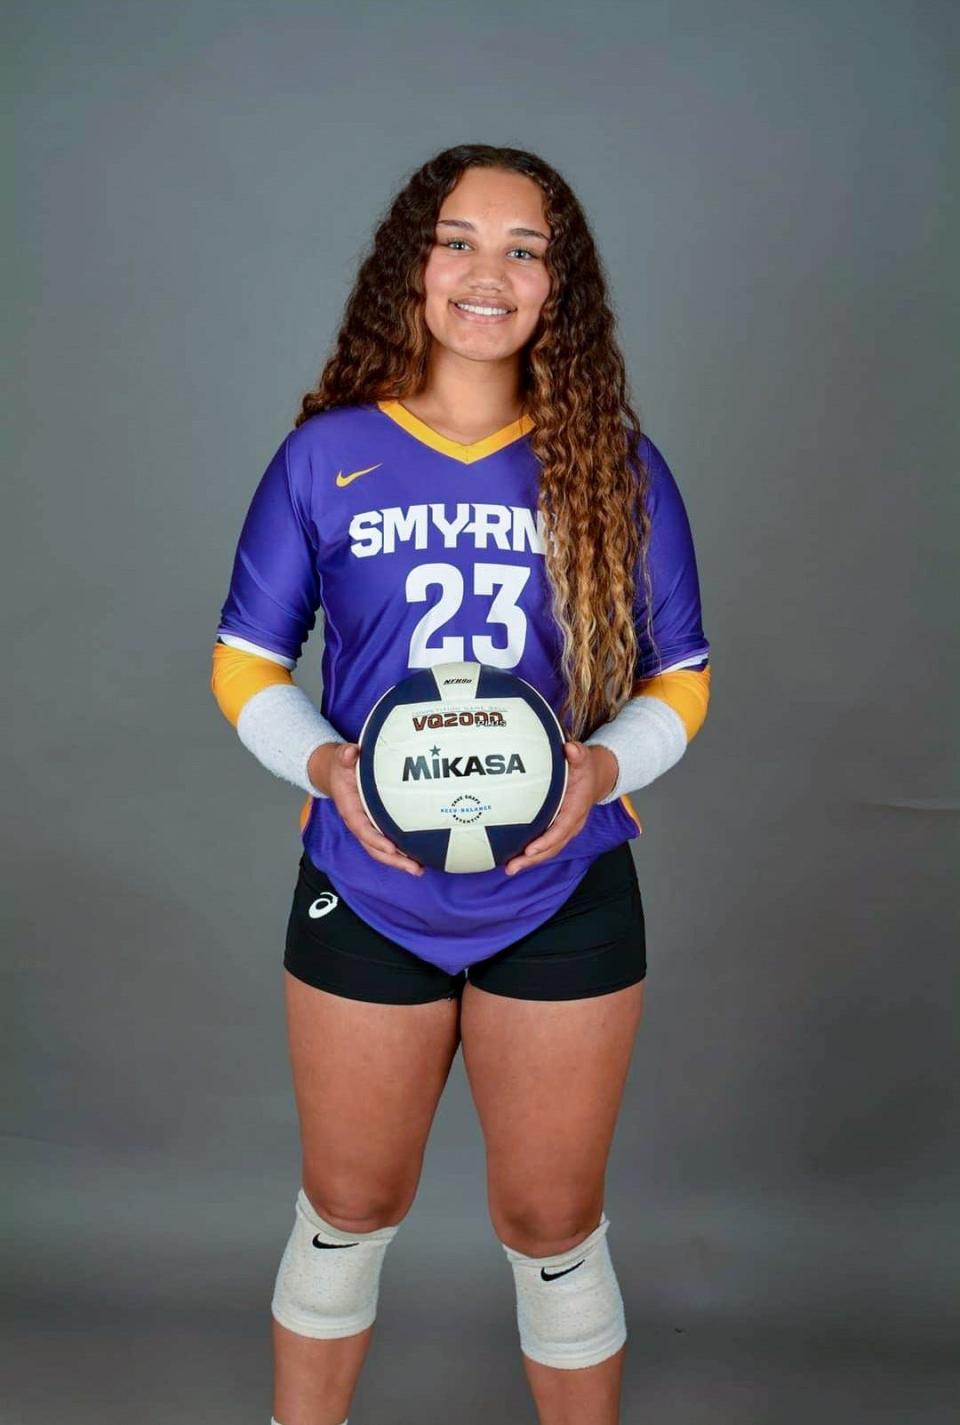 Smyrna senior volleyball and basketball player Janae Edmondson was seriously injured in an accident involving an automobile on Saturday, Feb. 18.